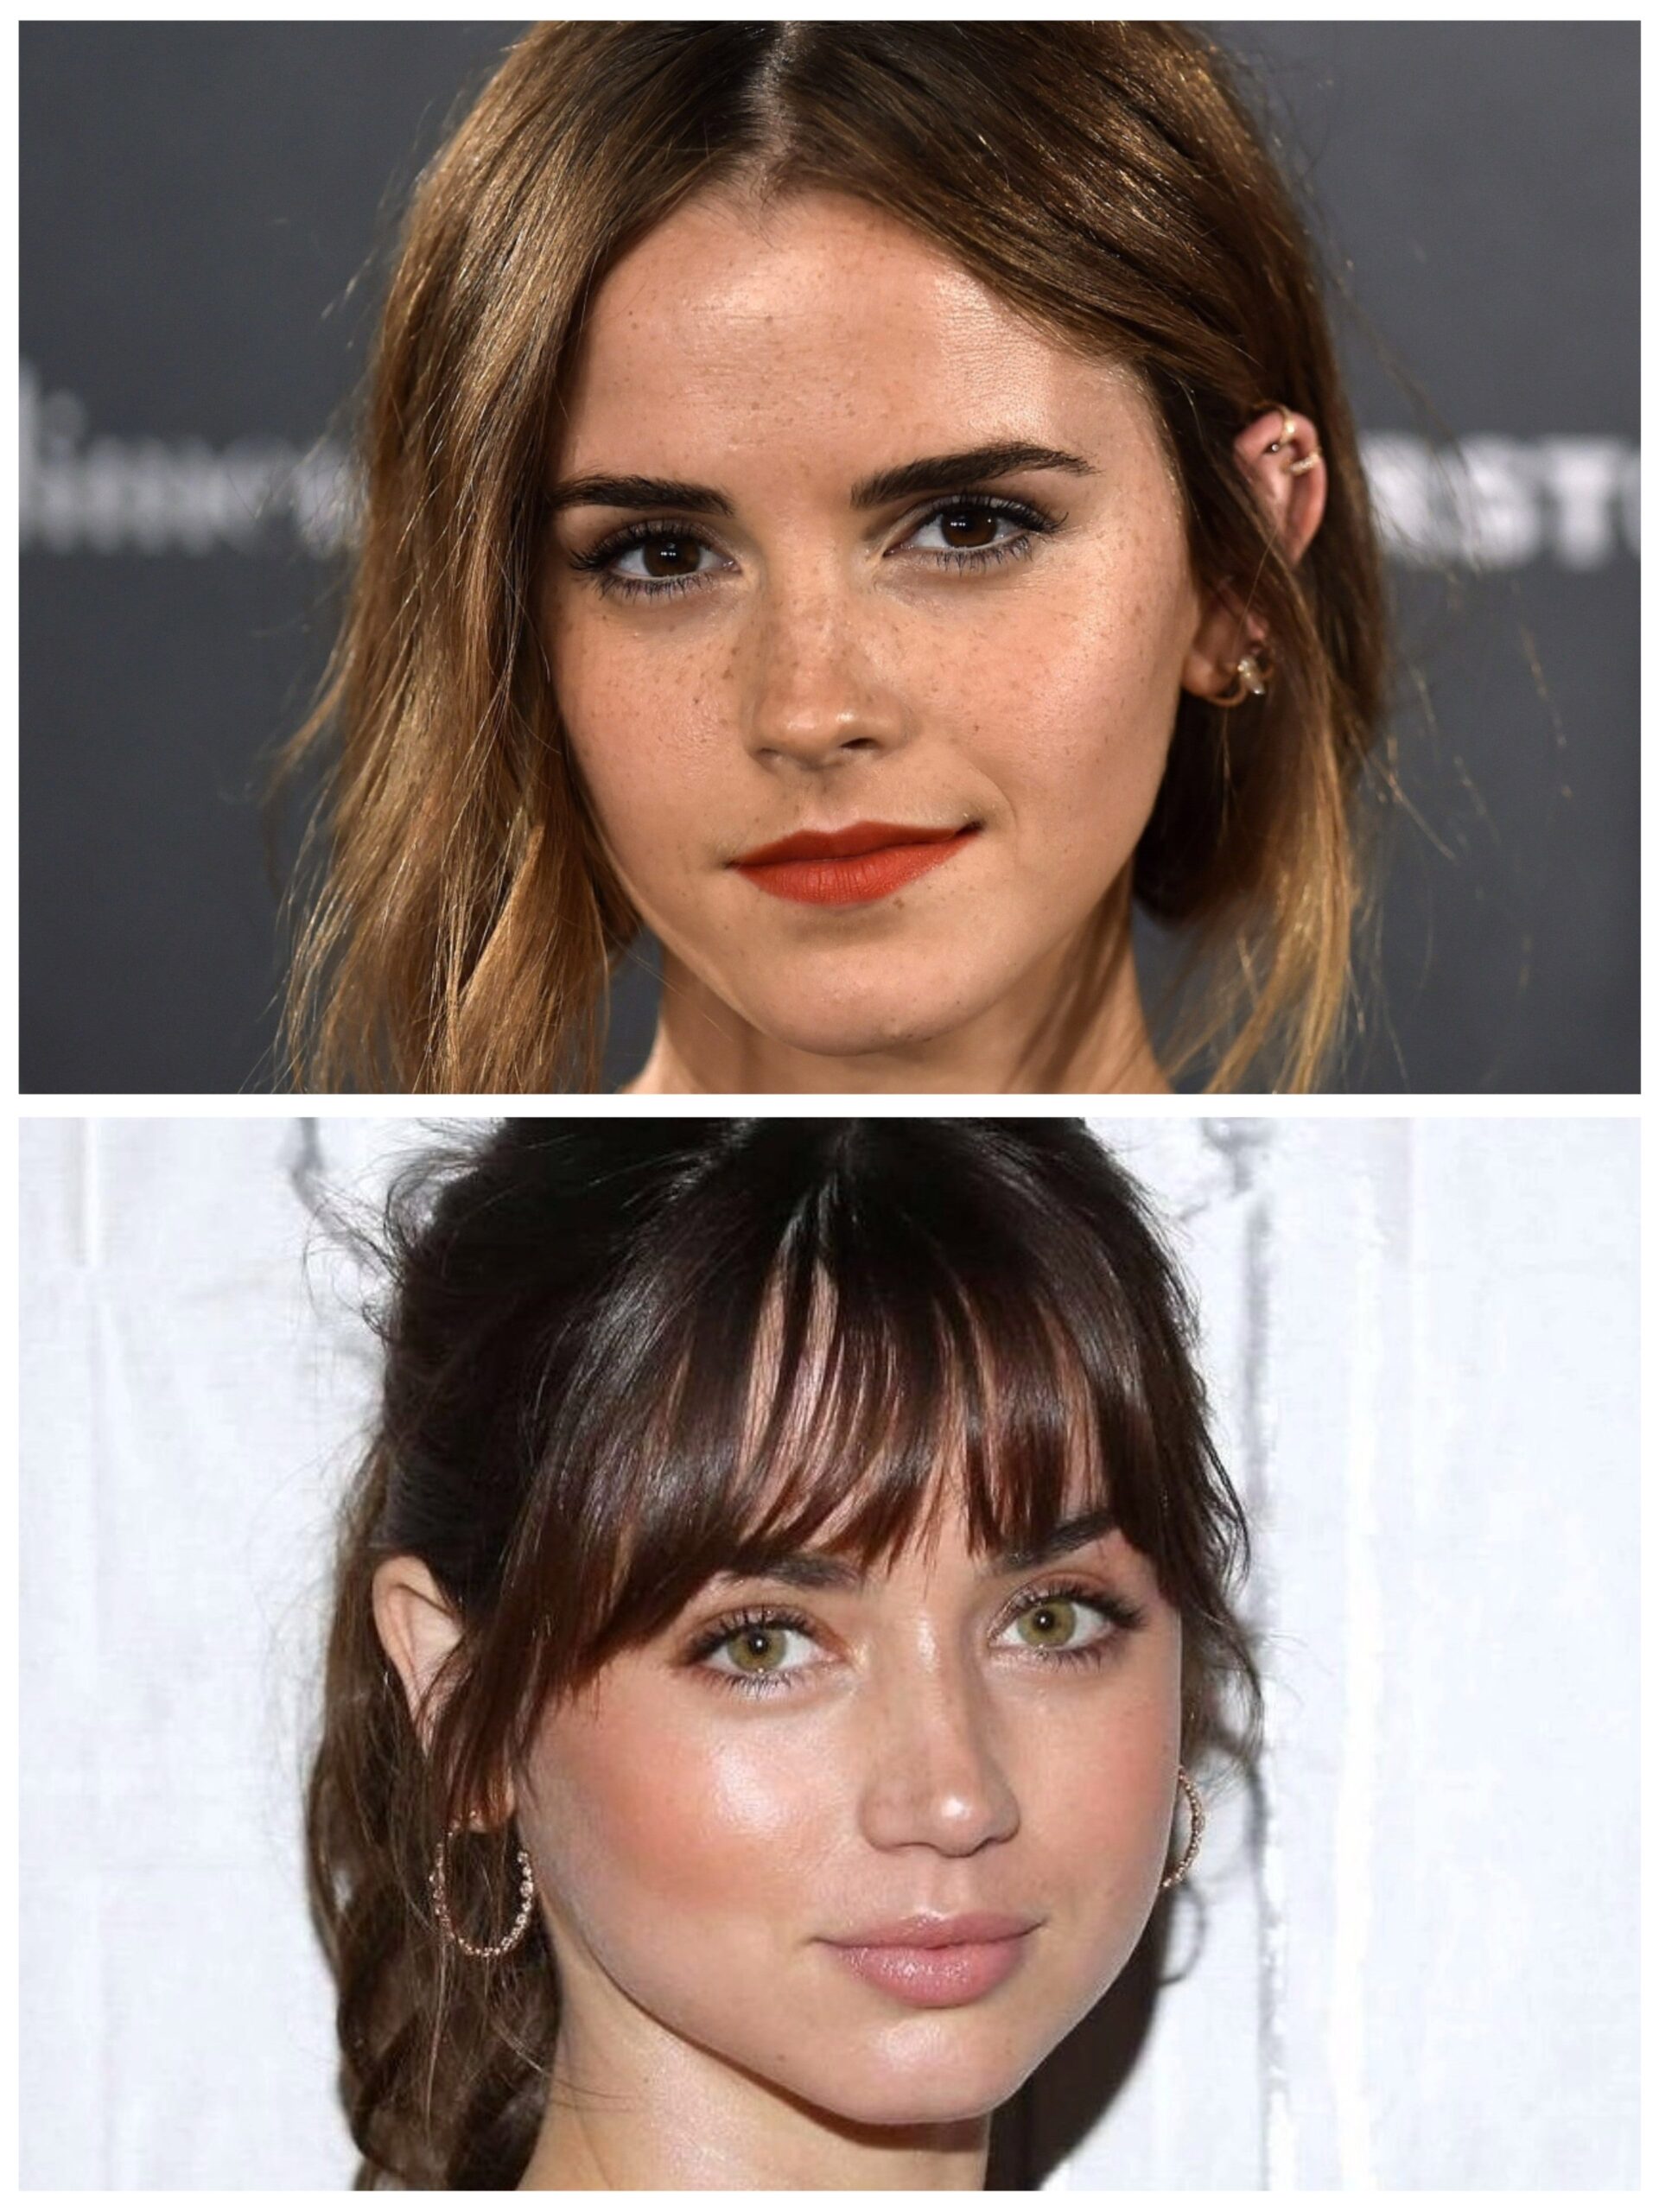 Whose face is getting your cum Emma Watson or Ana